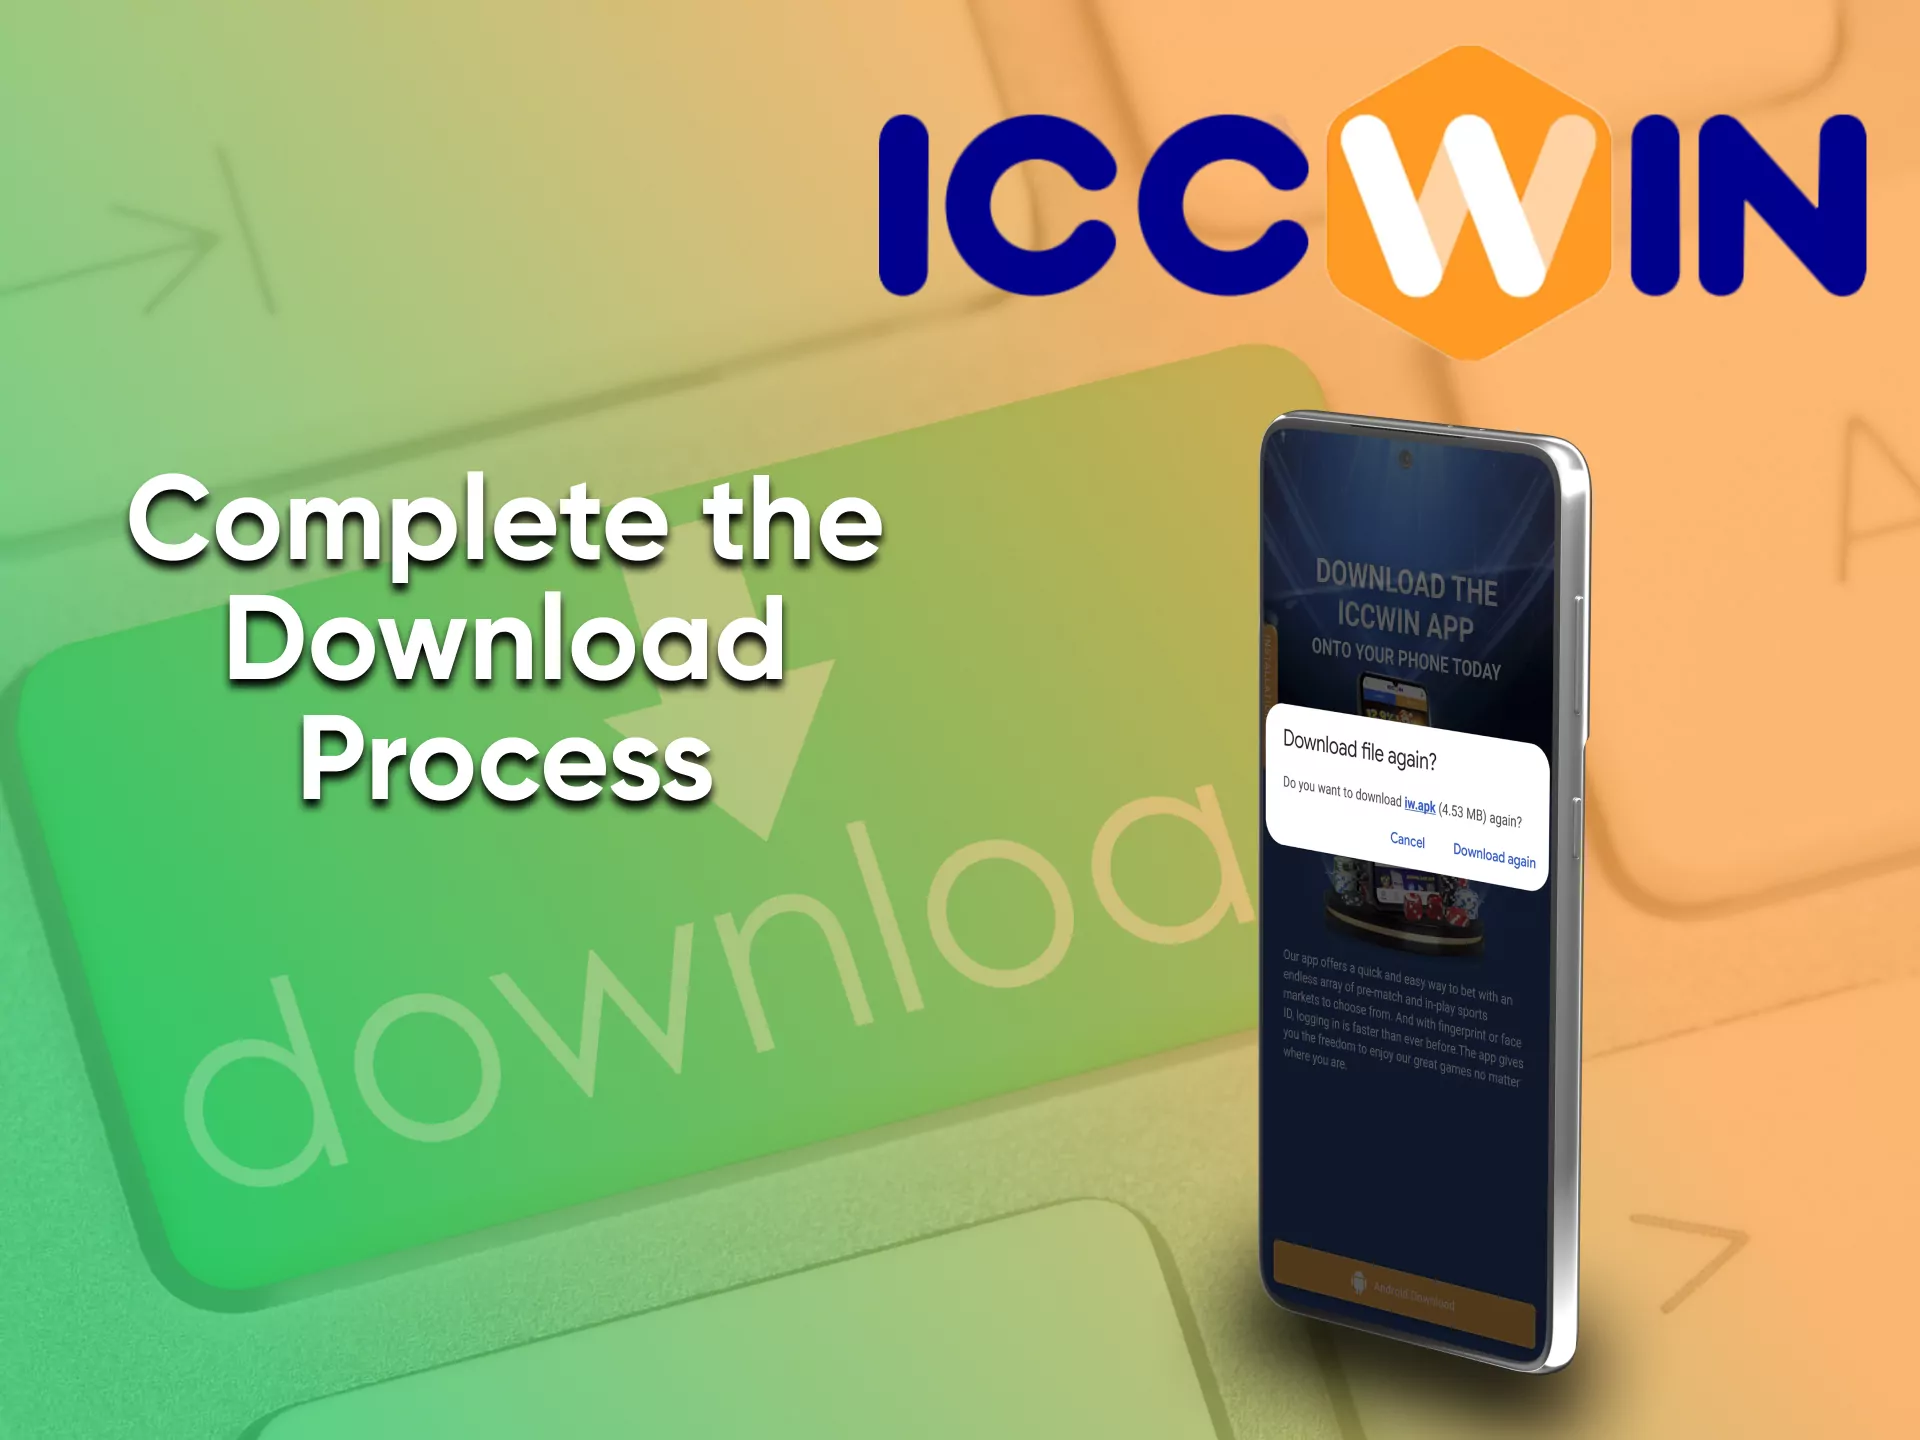 Install the application on your device from ICCWin.